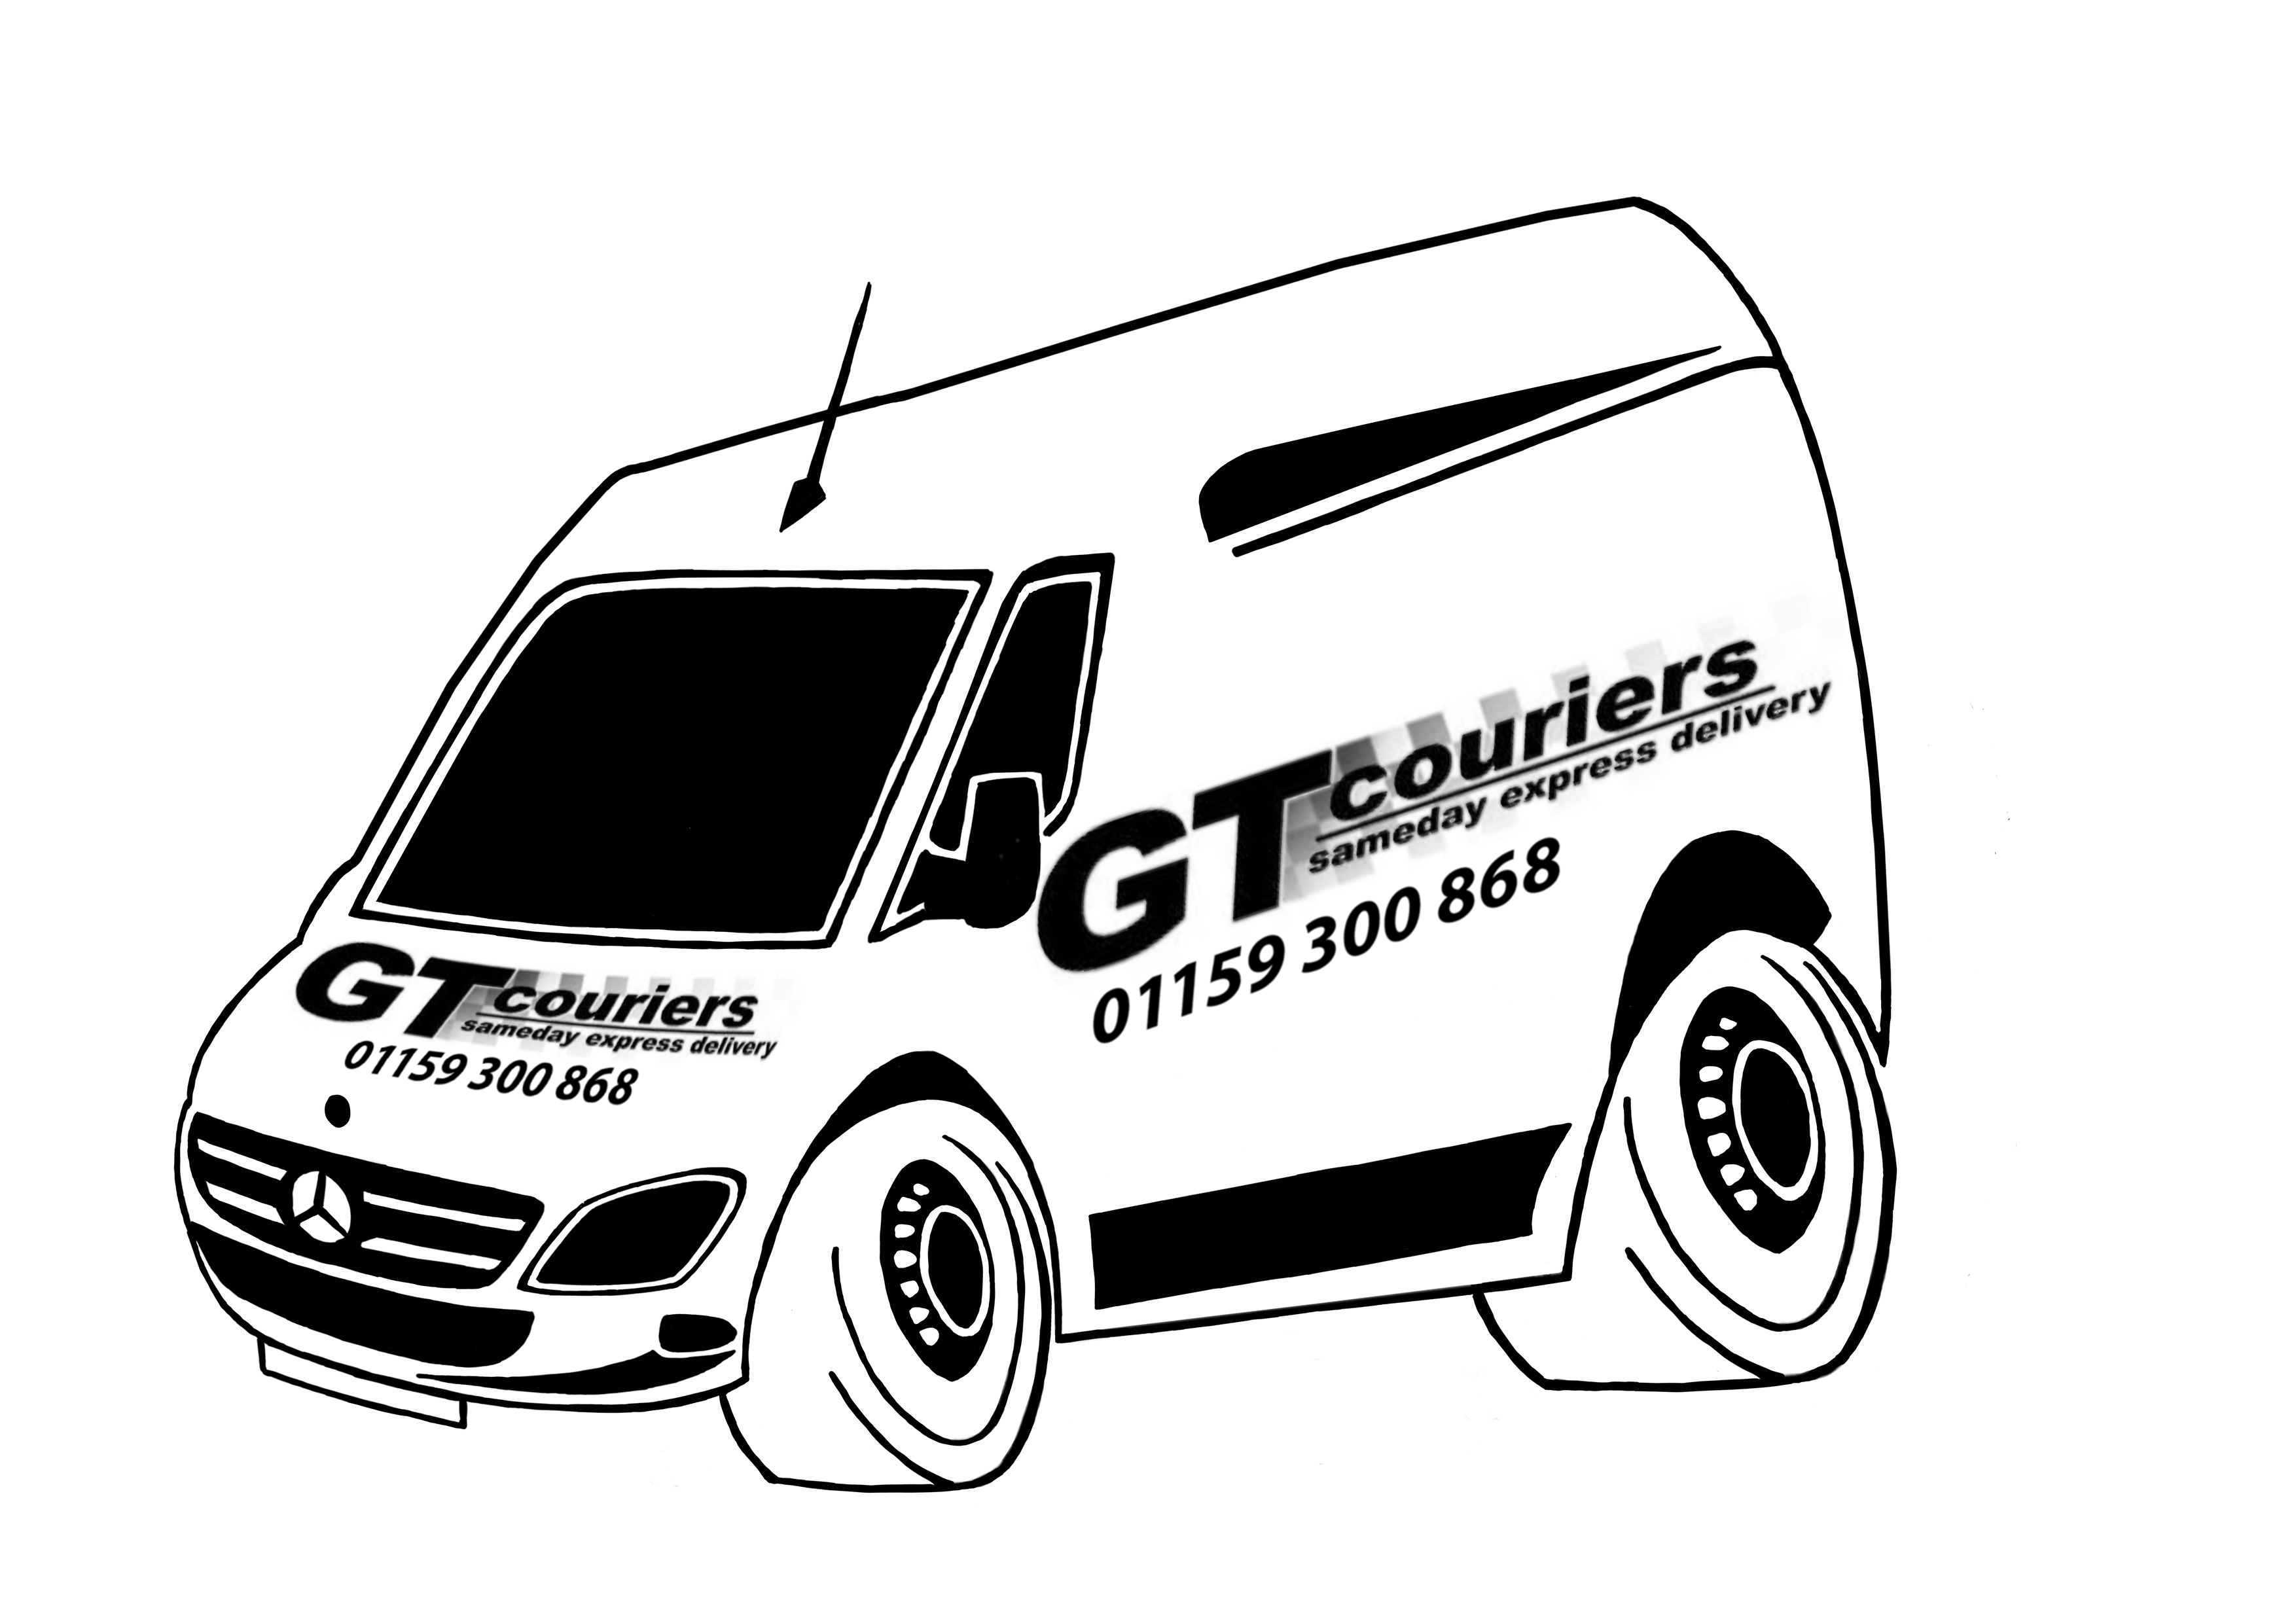 Logo of GT Couriers (UK) lTD Couriers In Derby, Derbyshire